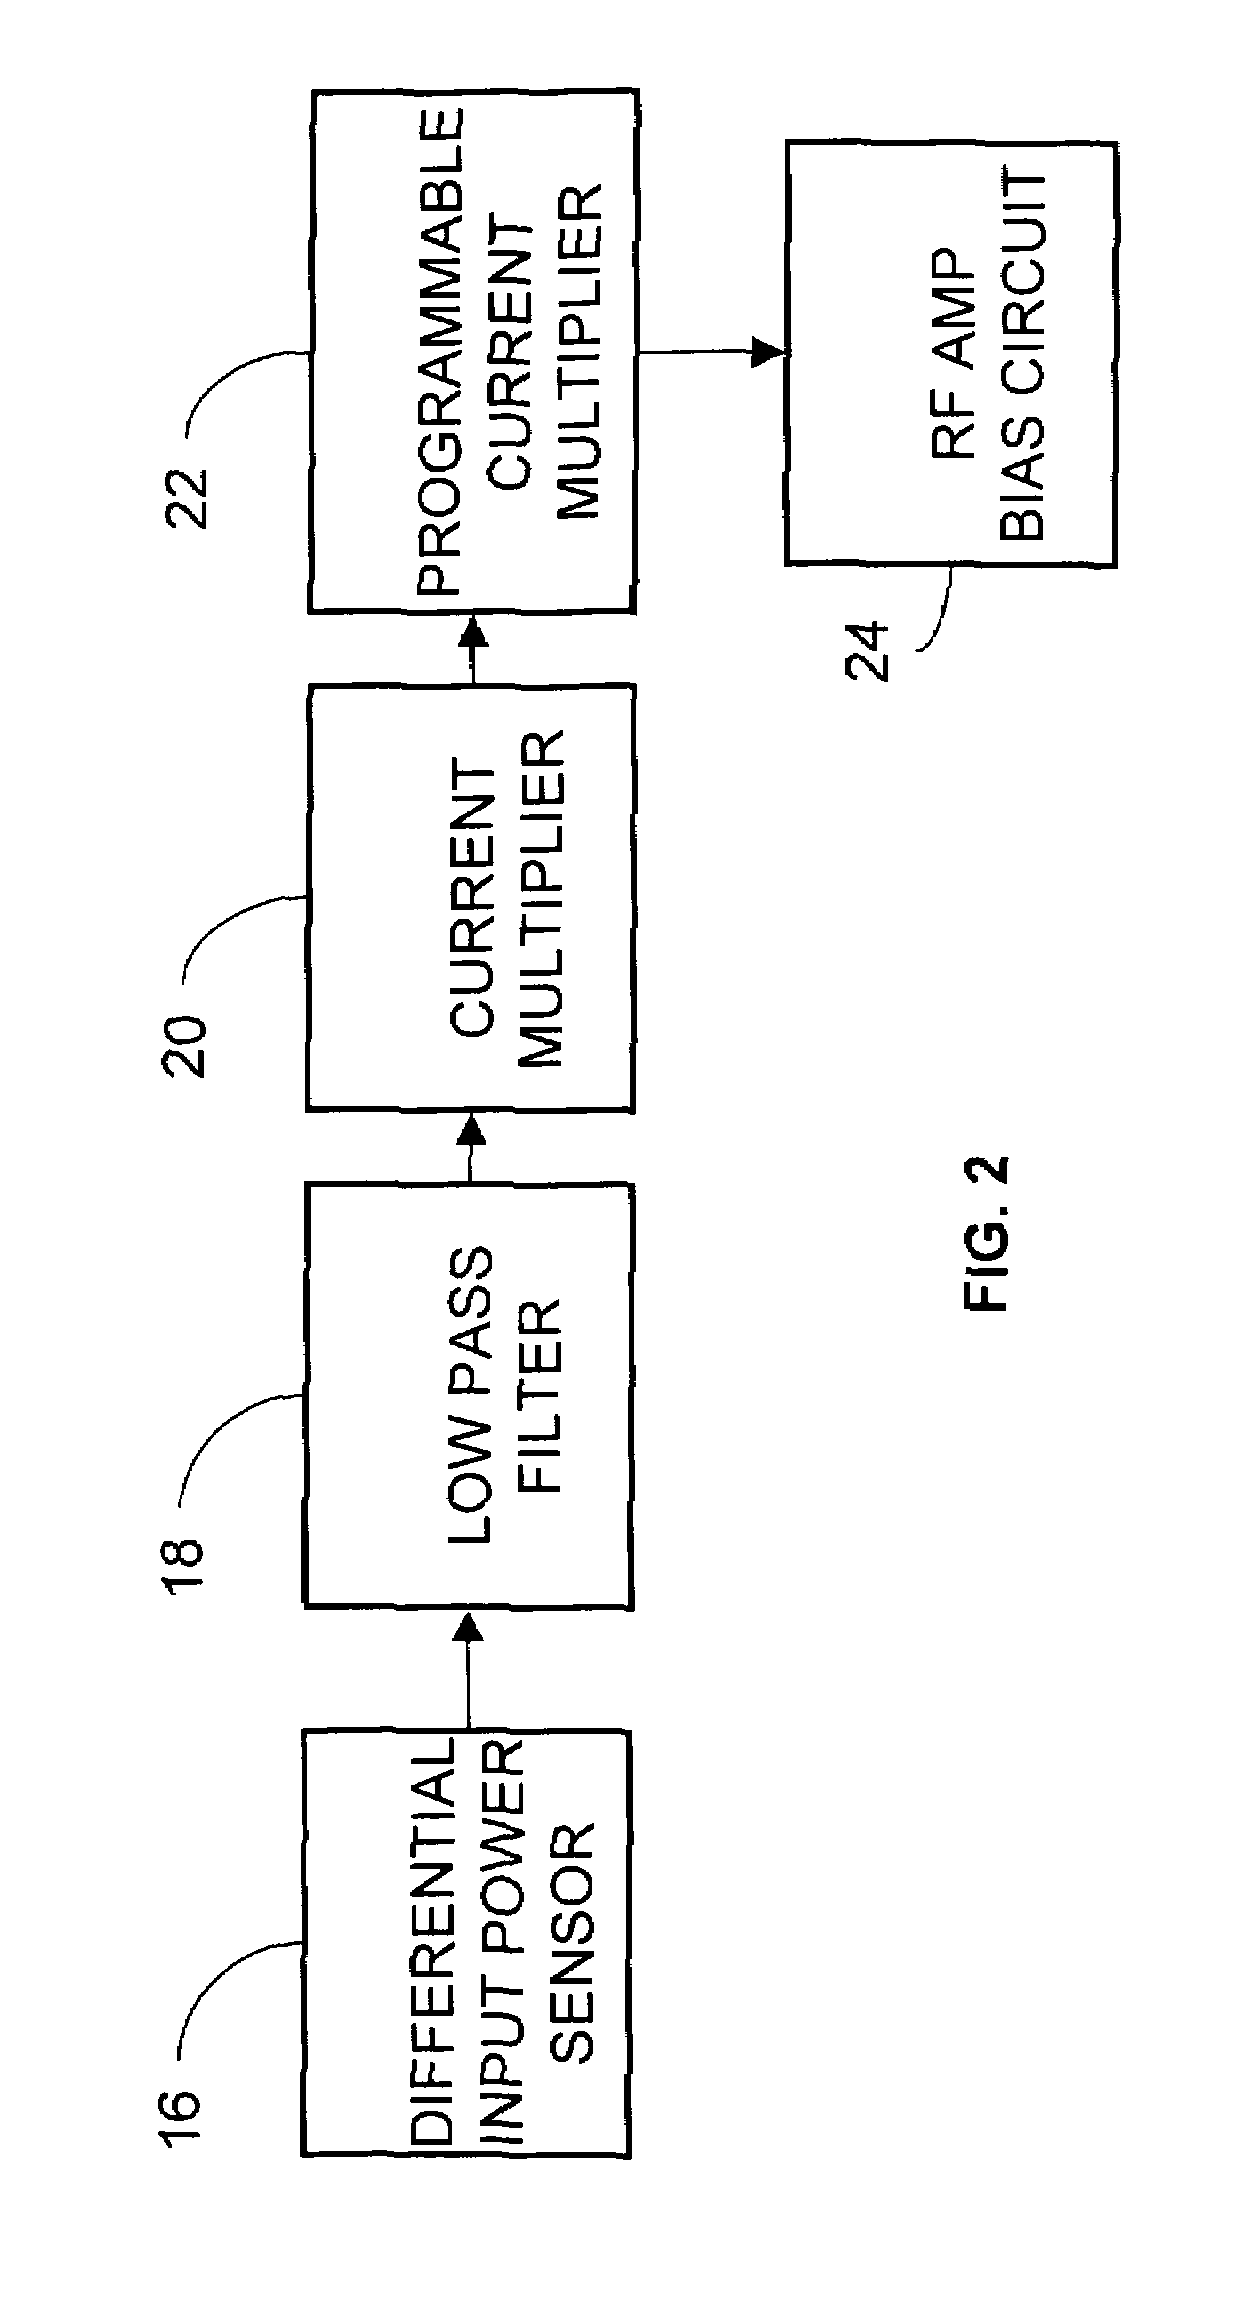 Adaptive bias current circuit and method for amplifiers